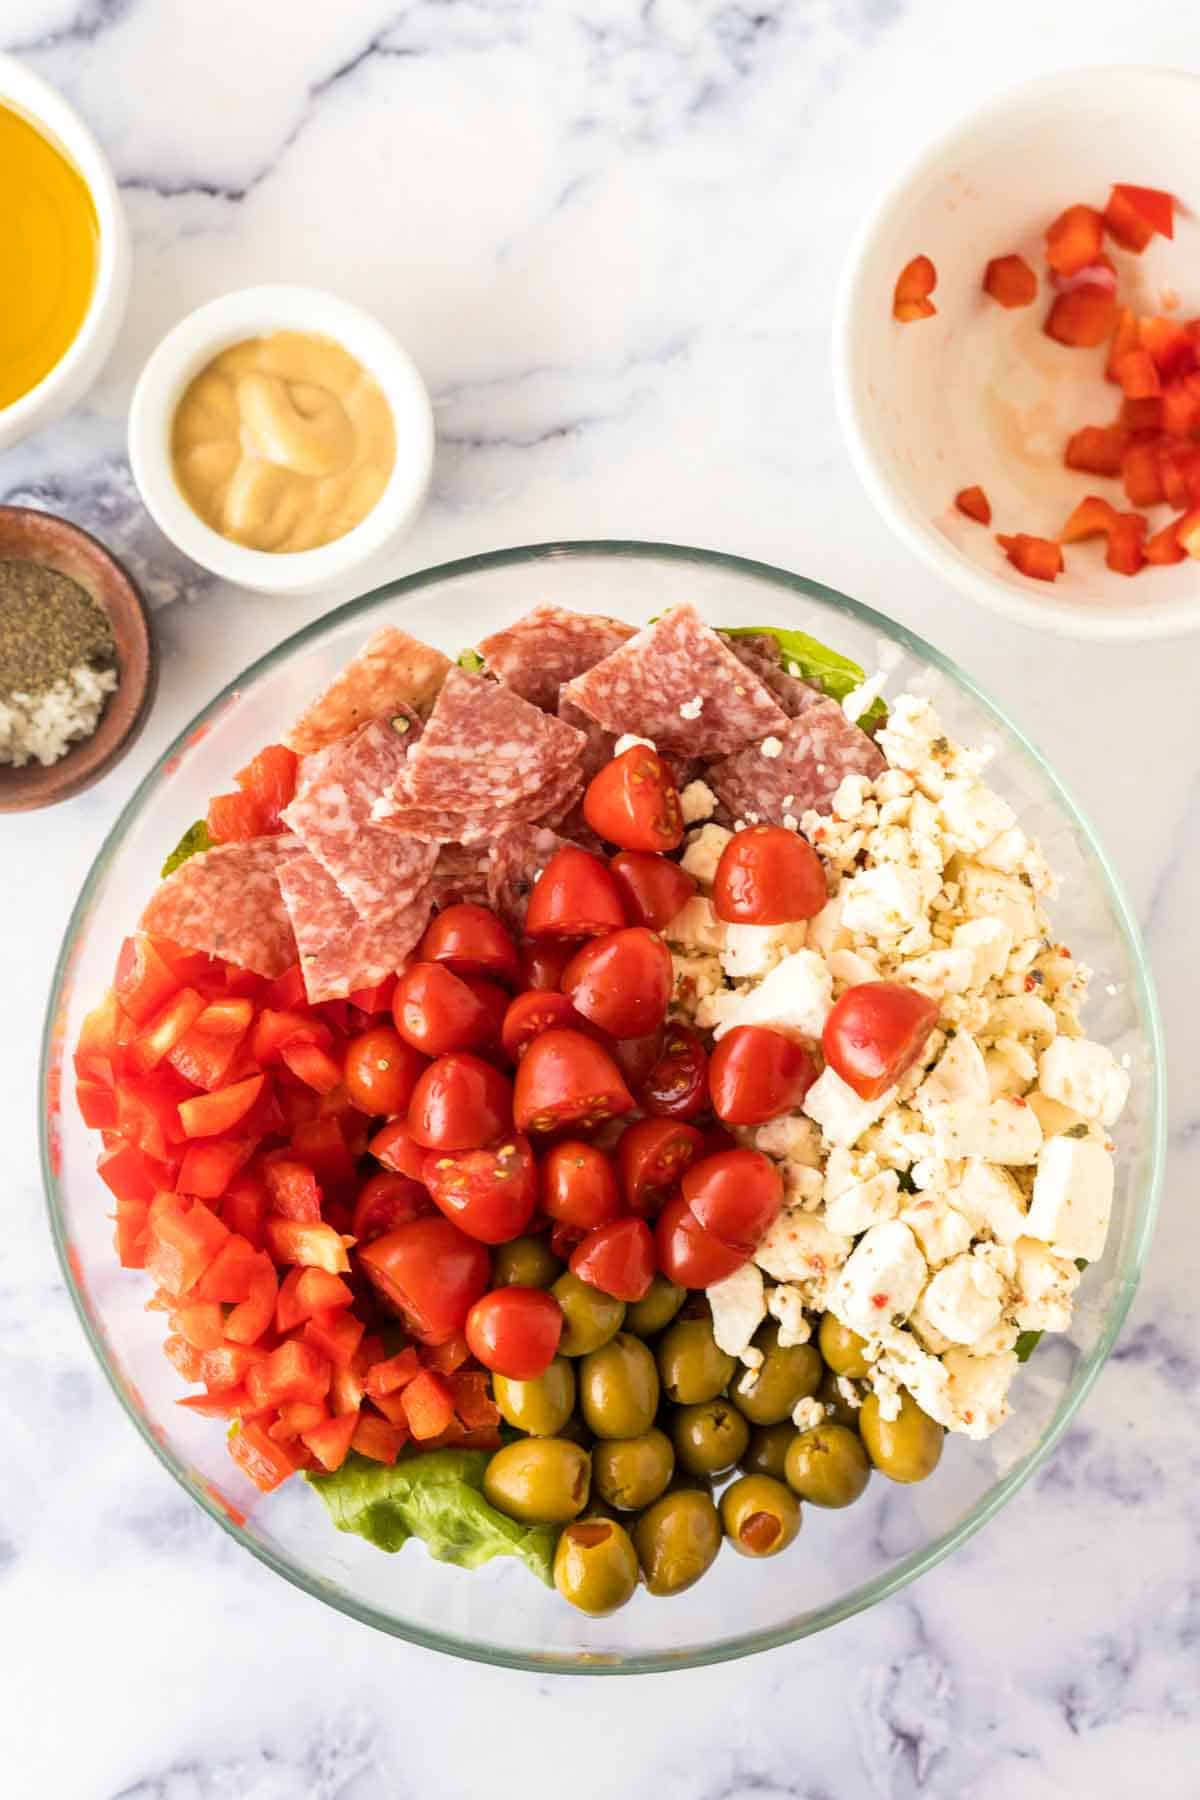 Mixing ingredients together in a bowl to make antipasto salad.